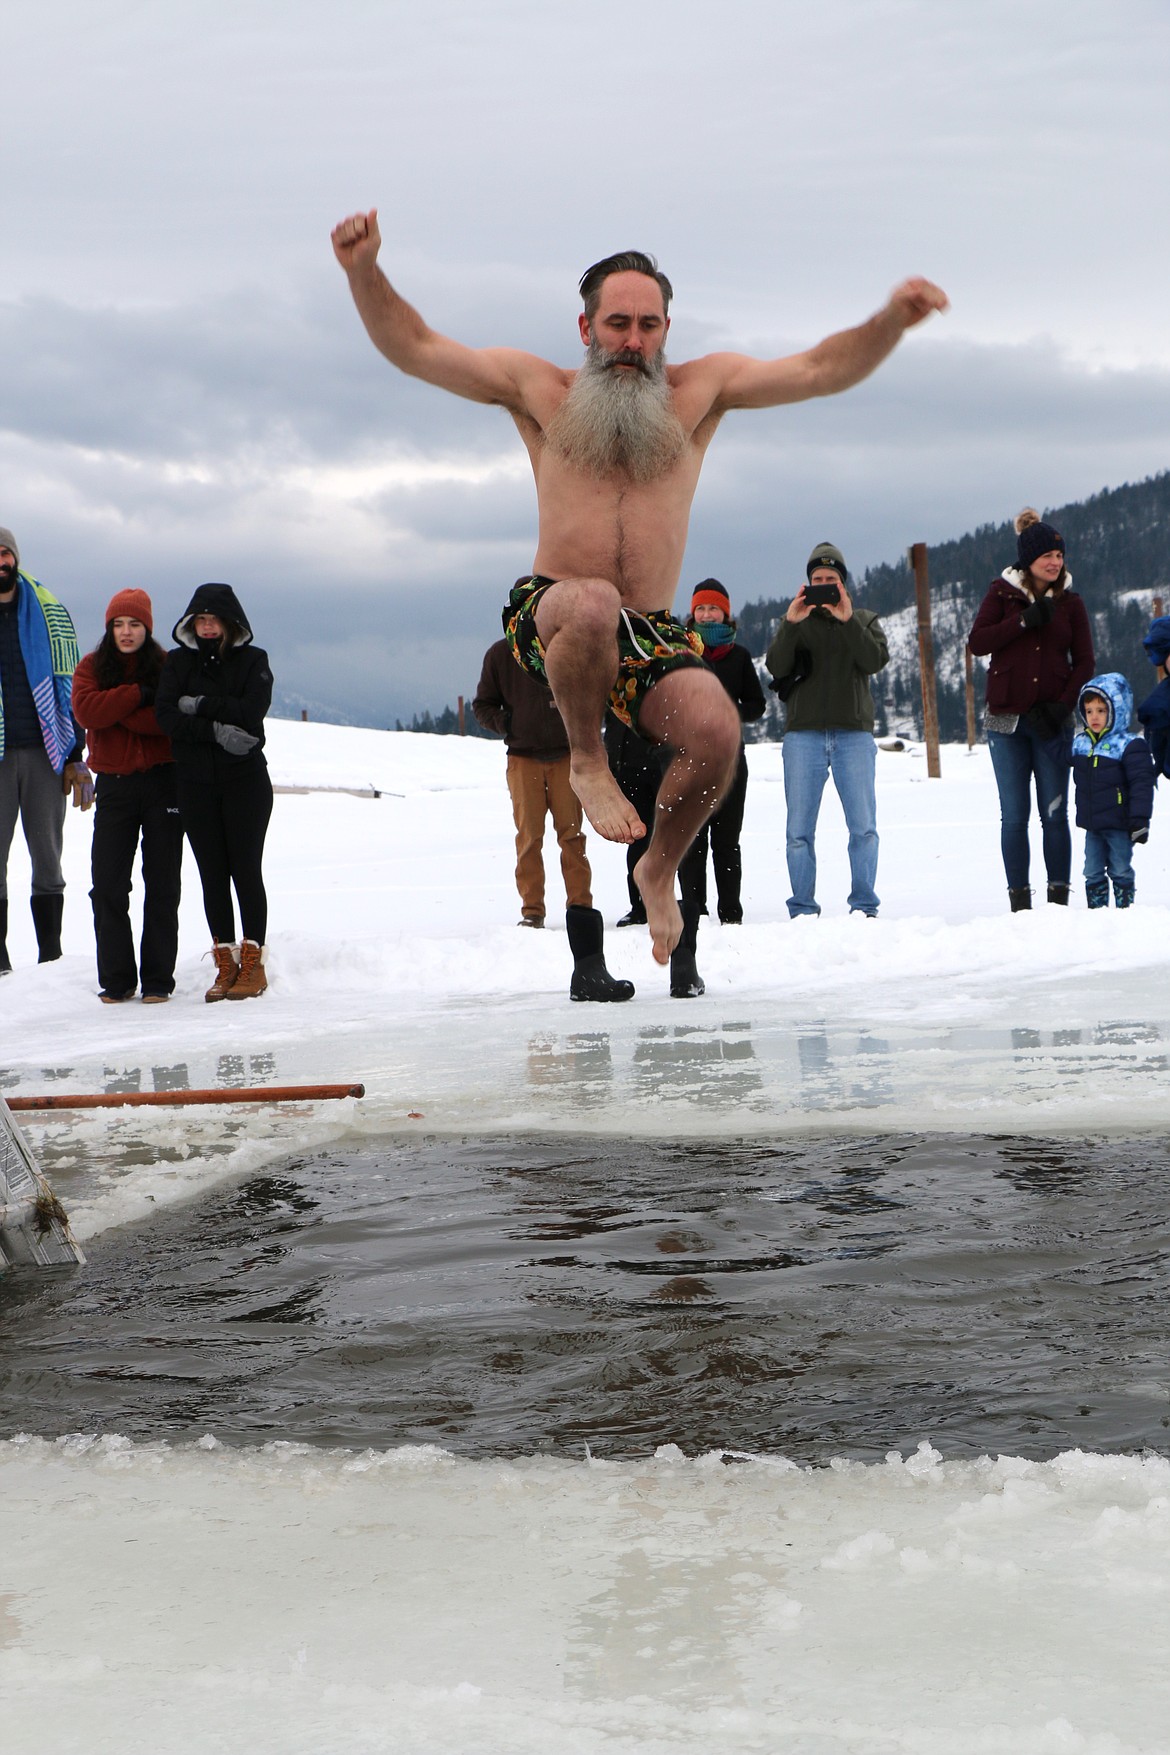 Tod Prather, the father of Boy Scout Kai Prather, a member of Troop 111, jumps into Lake Pend Oreille during Saturday's Polar Bear Plunge.